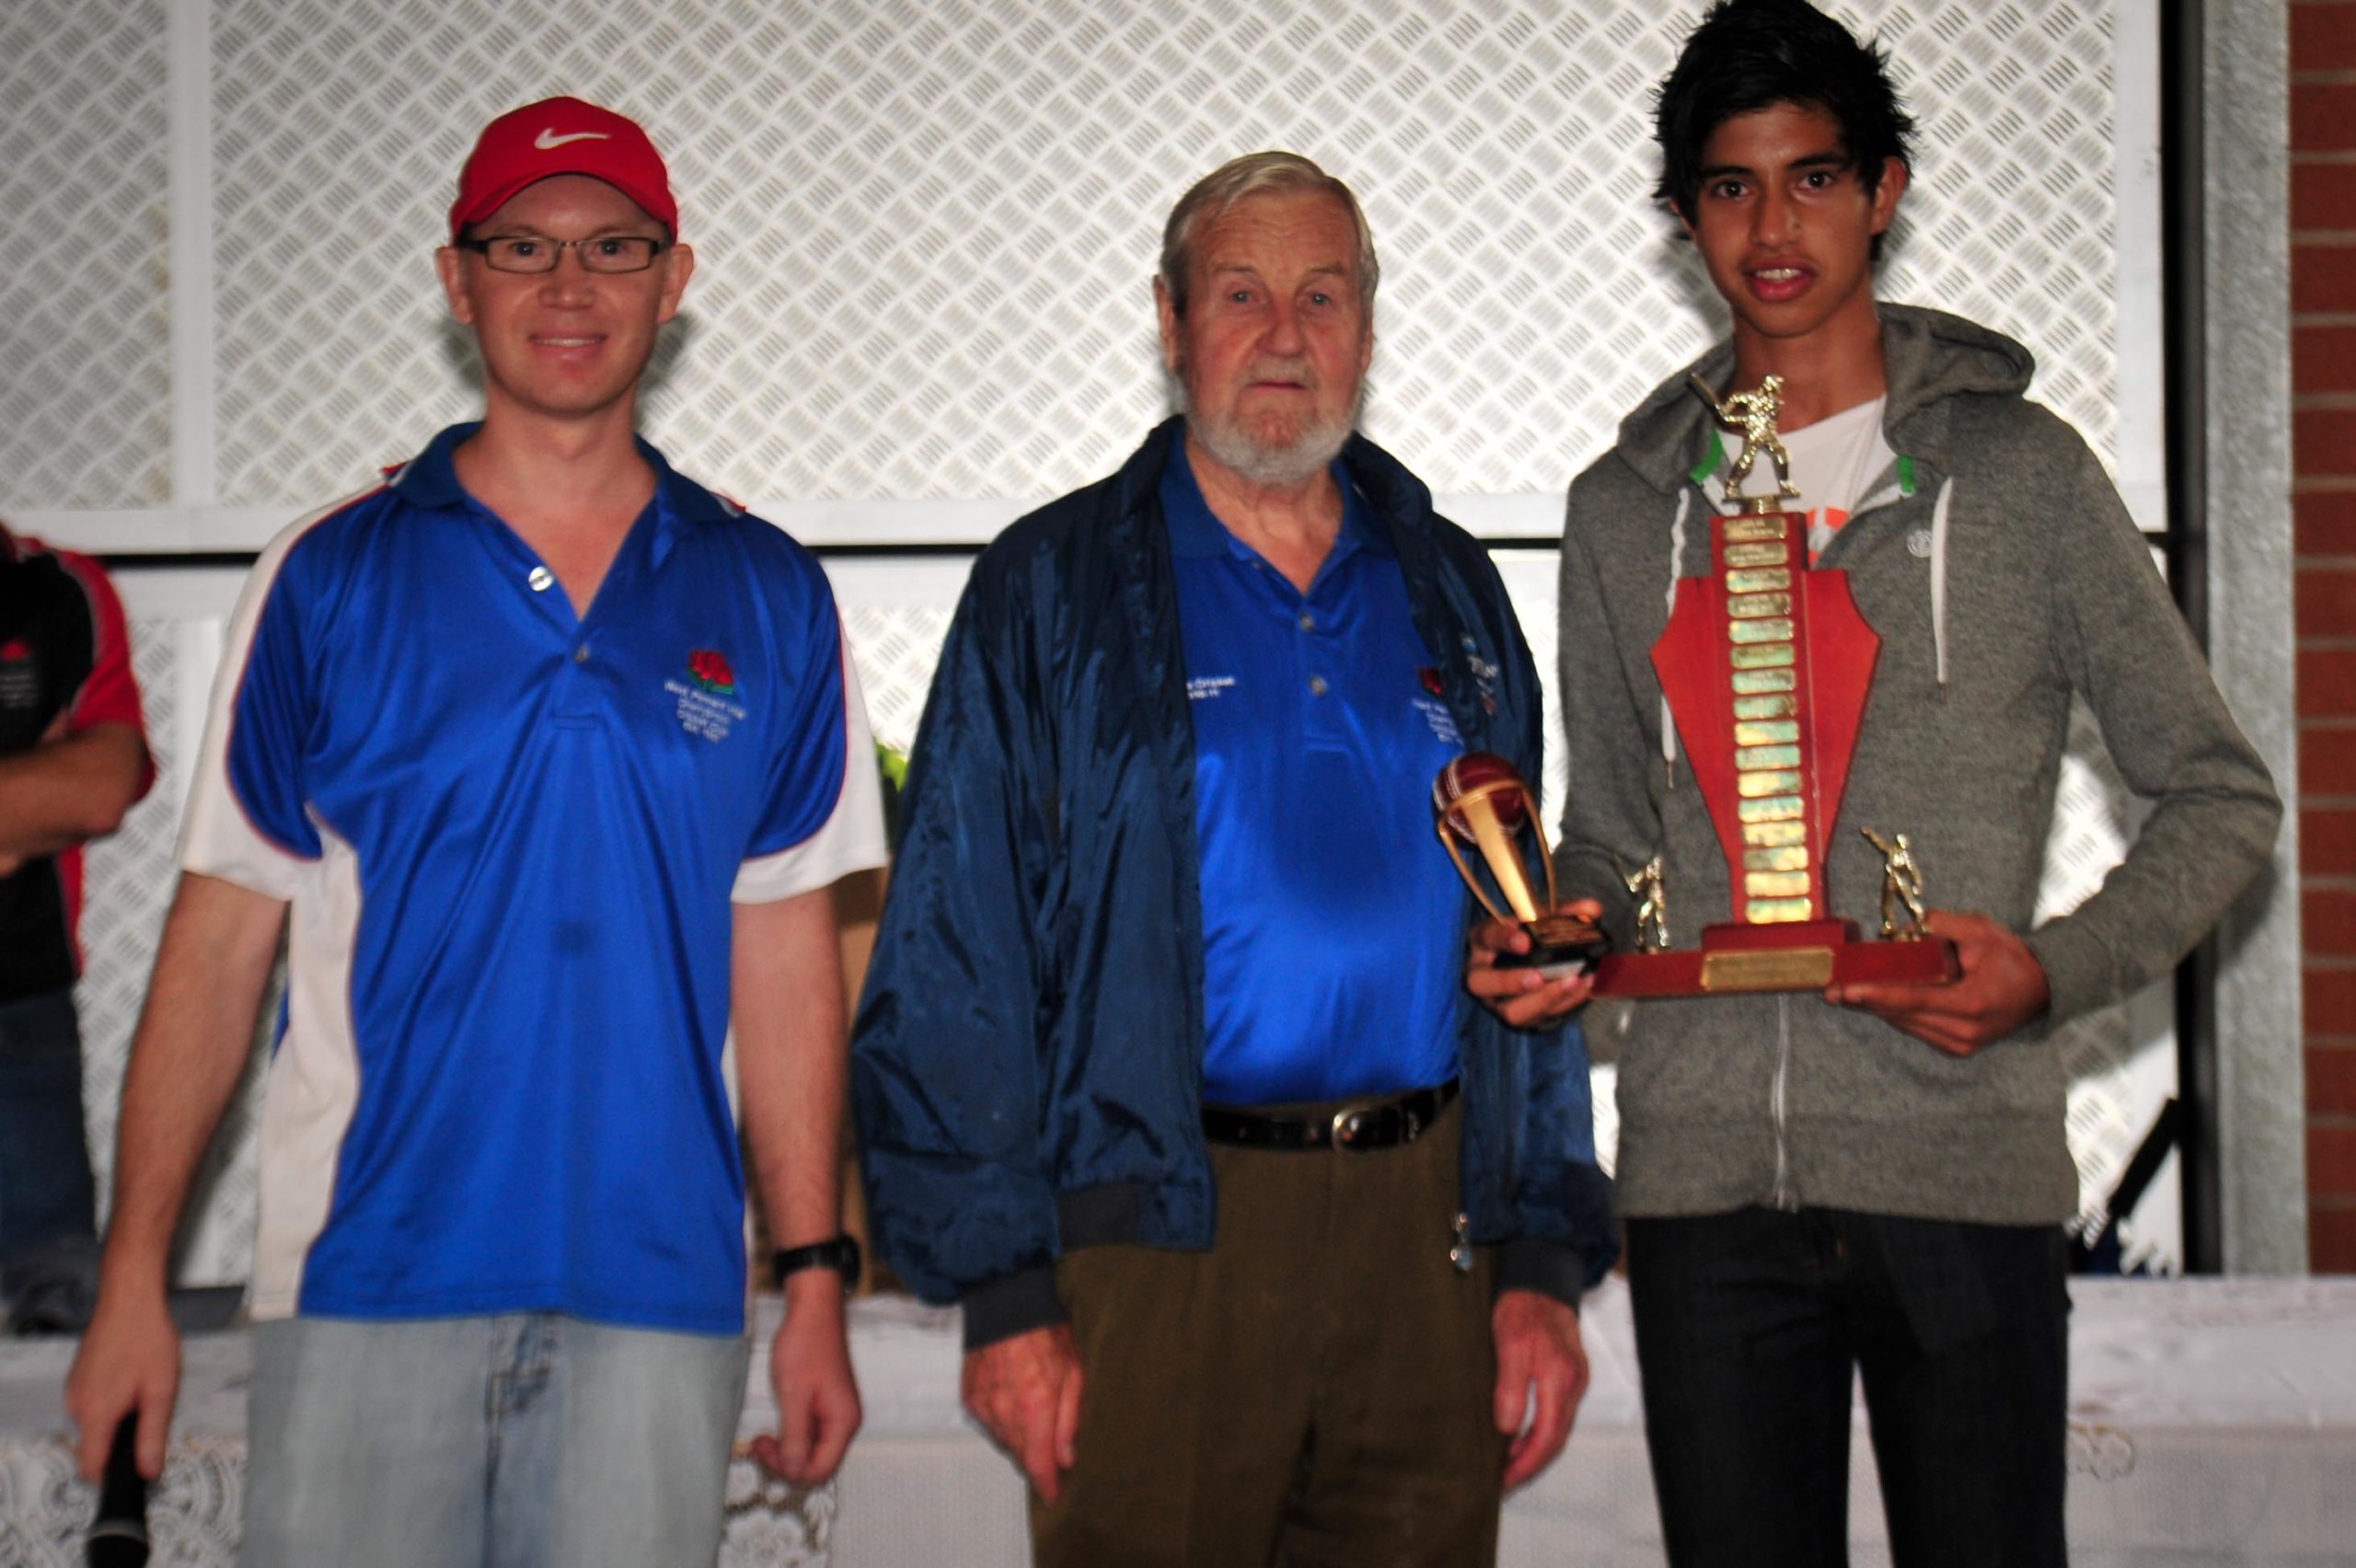 Mansimar Singh with James Trainor & John Coulthard - John Coulthard player of the Year